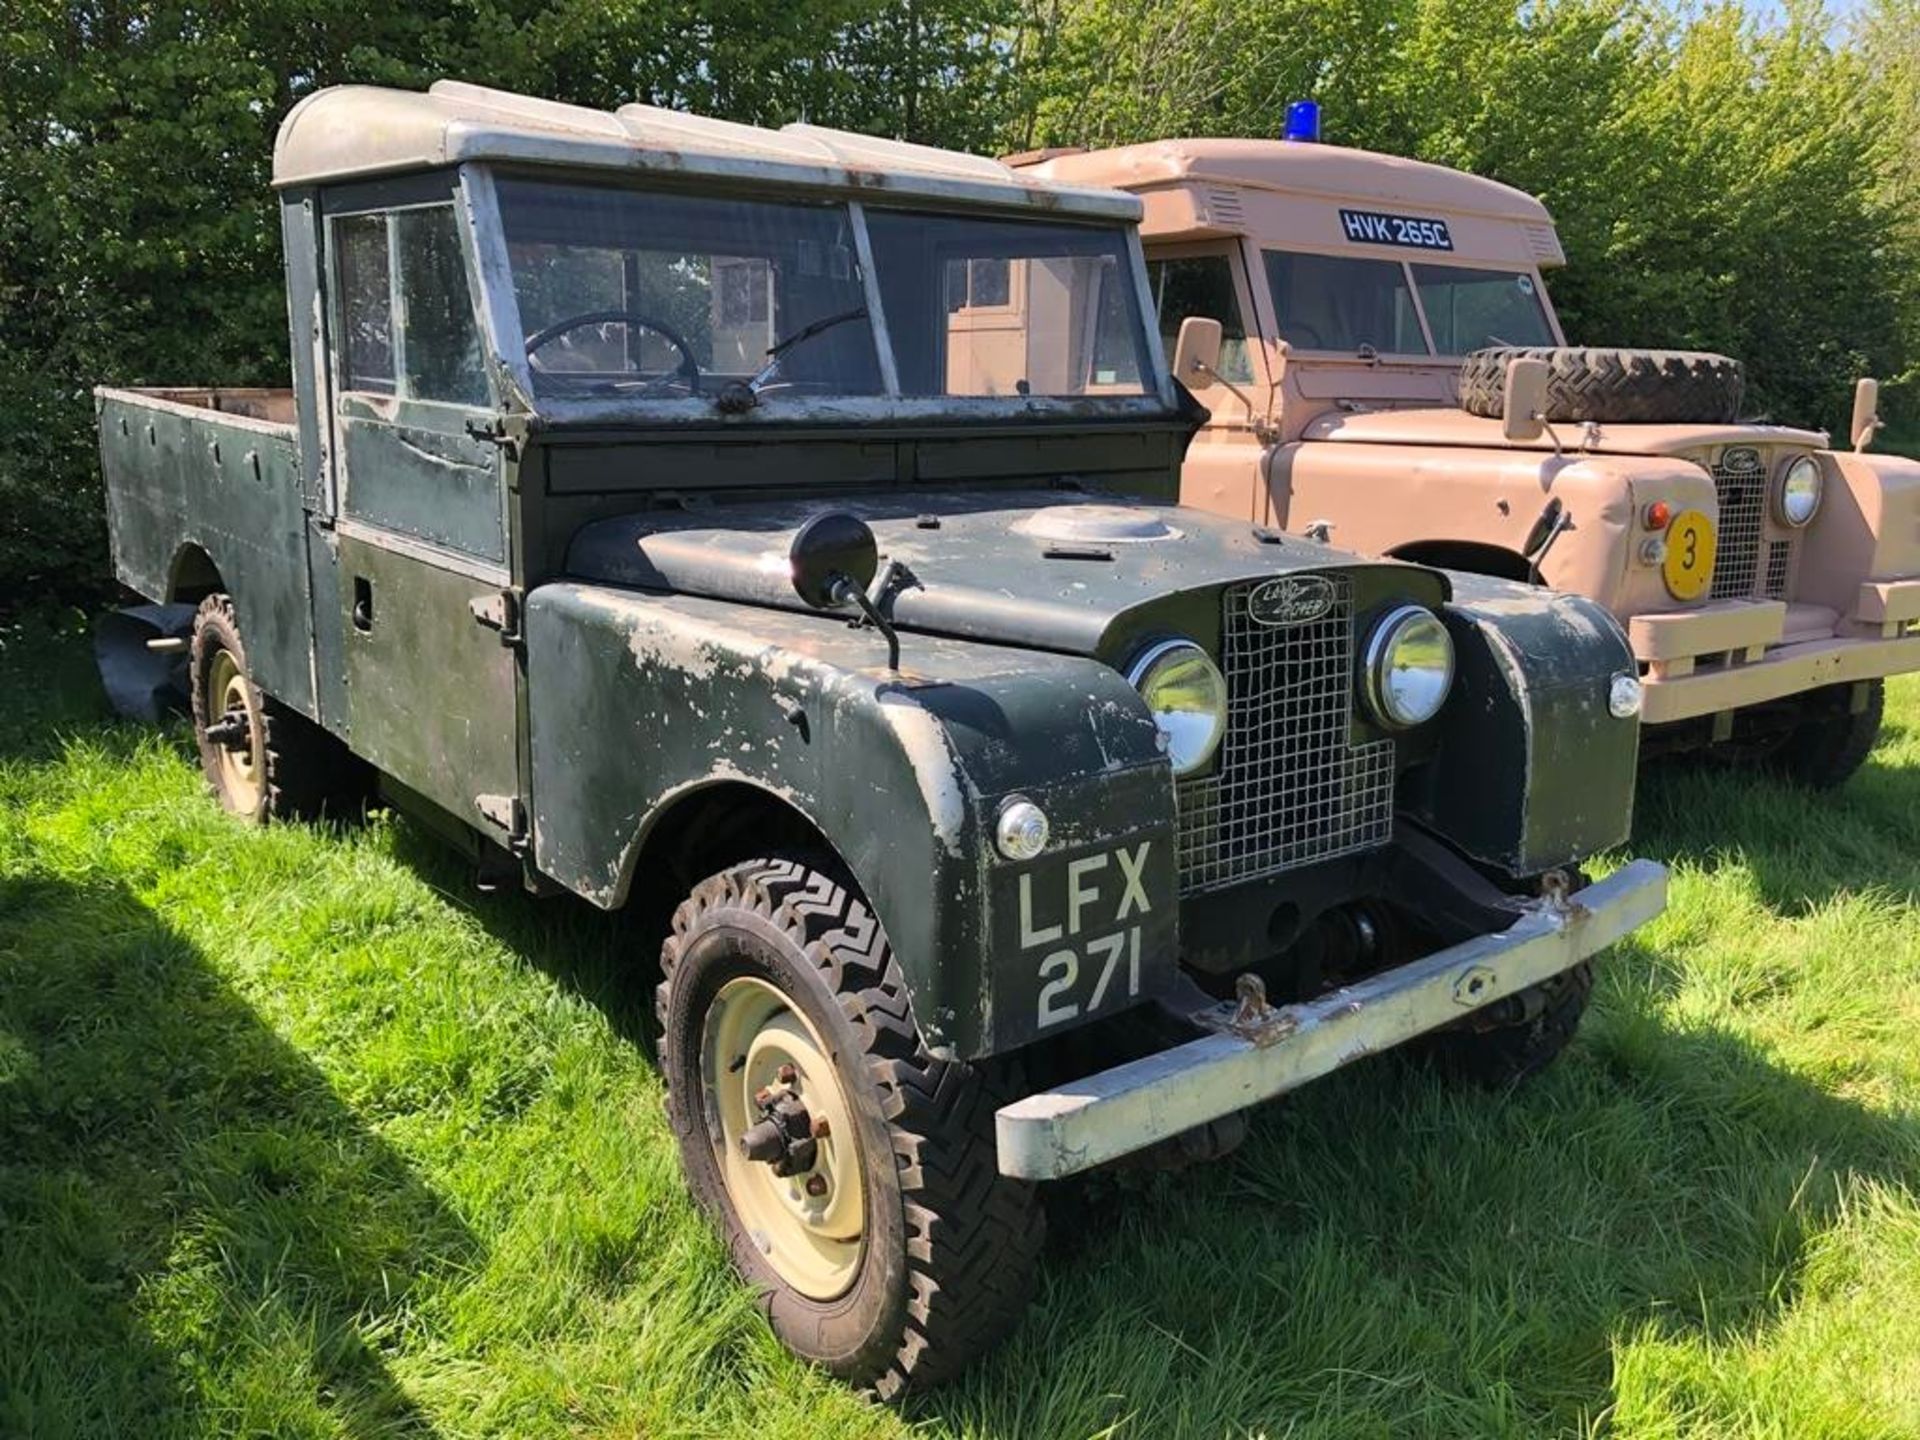 1957 Land Rover Series 1 Registration number LFX 271 109 inch pick up with a 2.0 diesel Plenty of